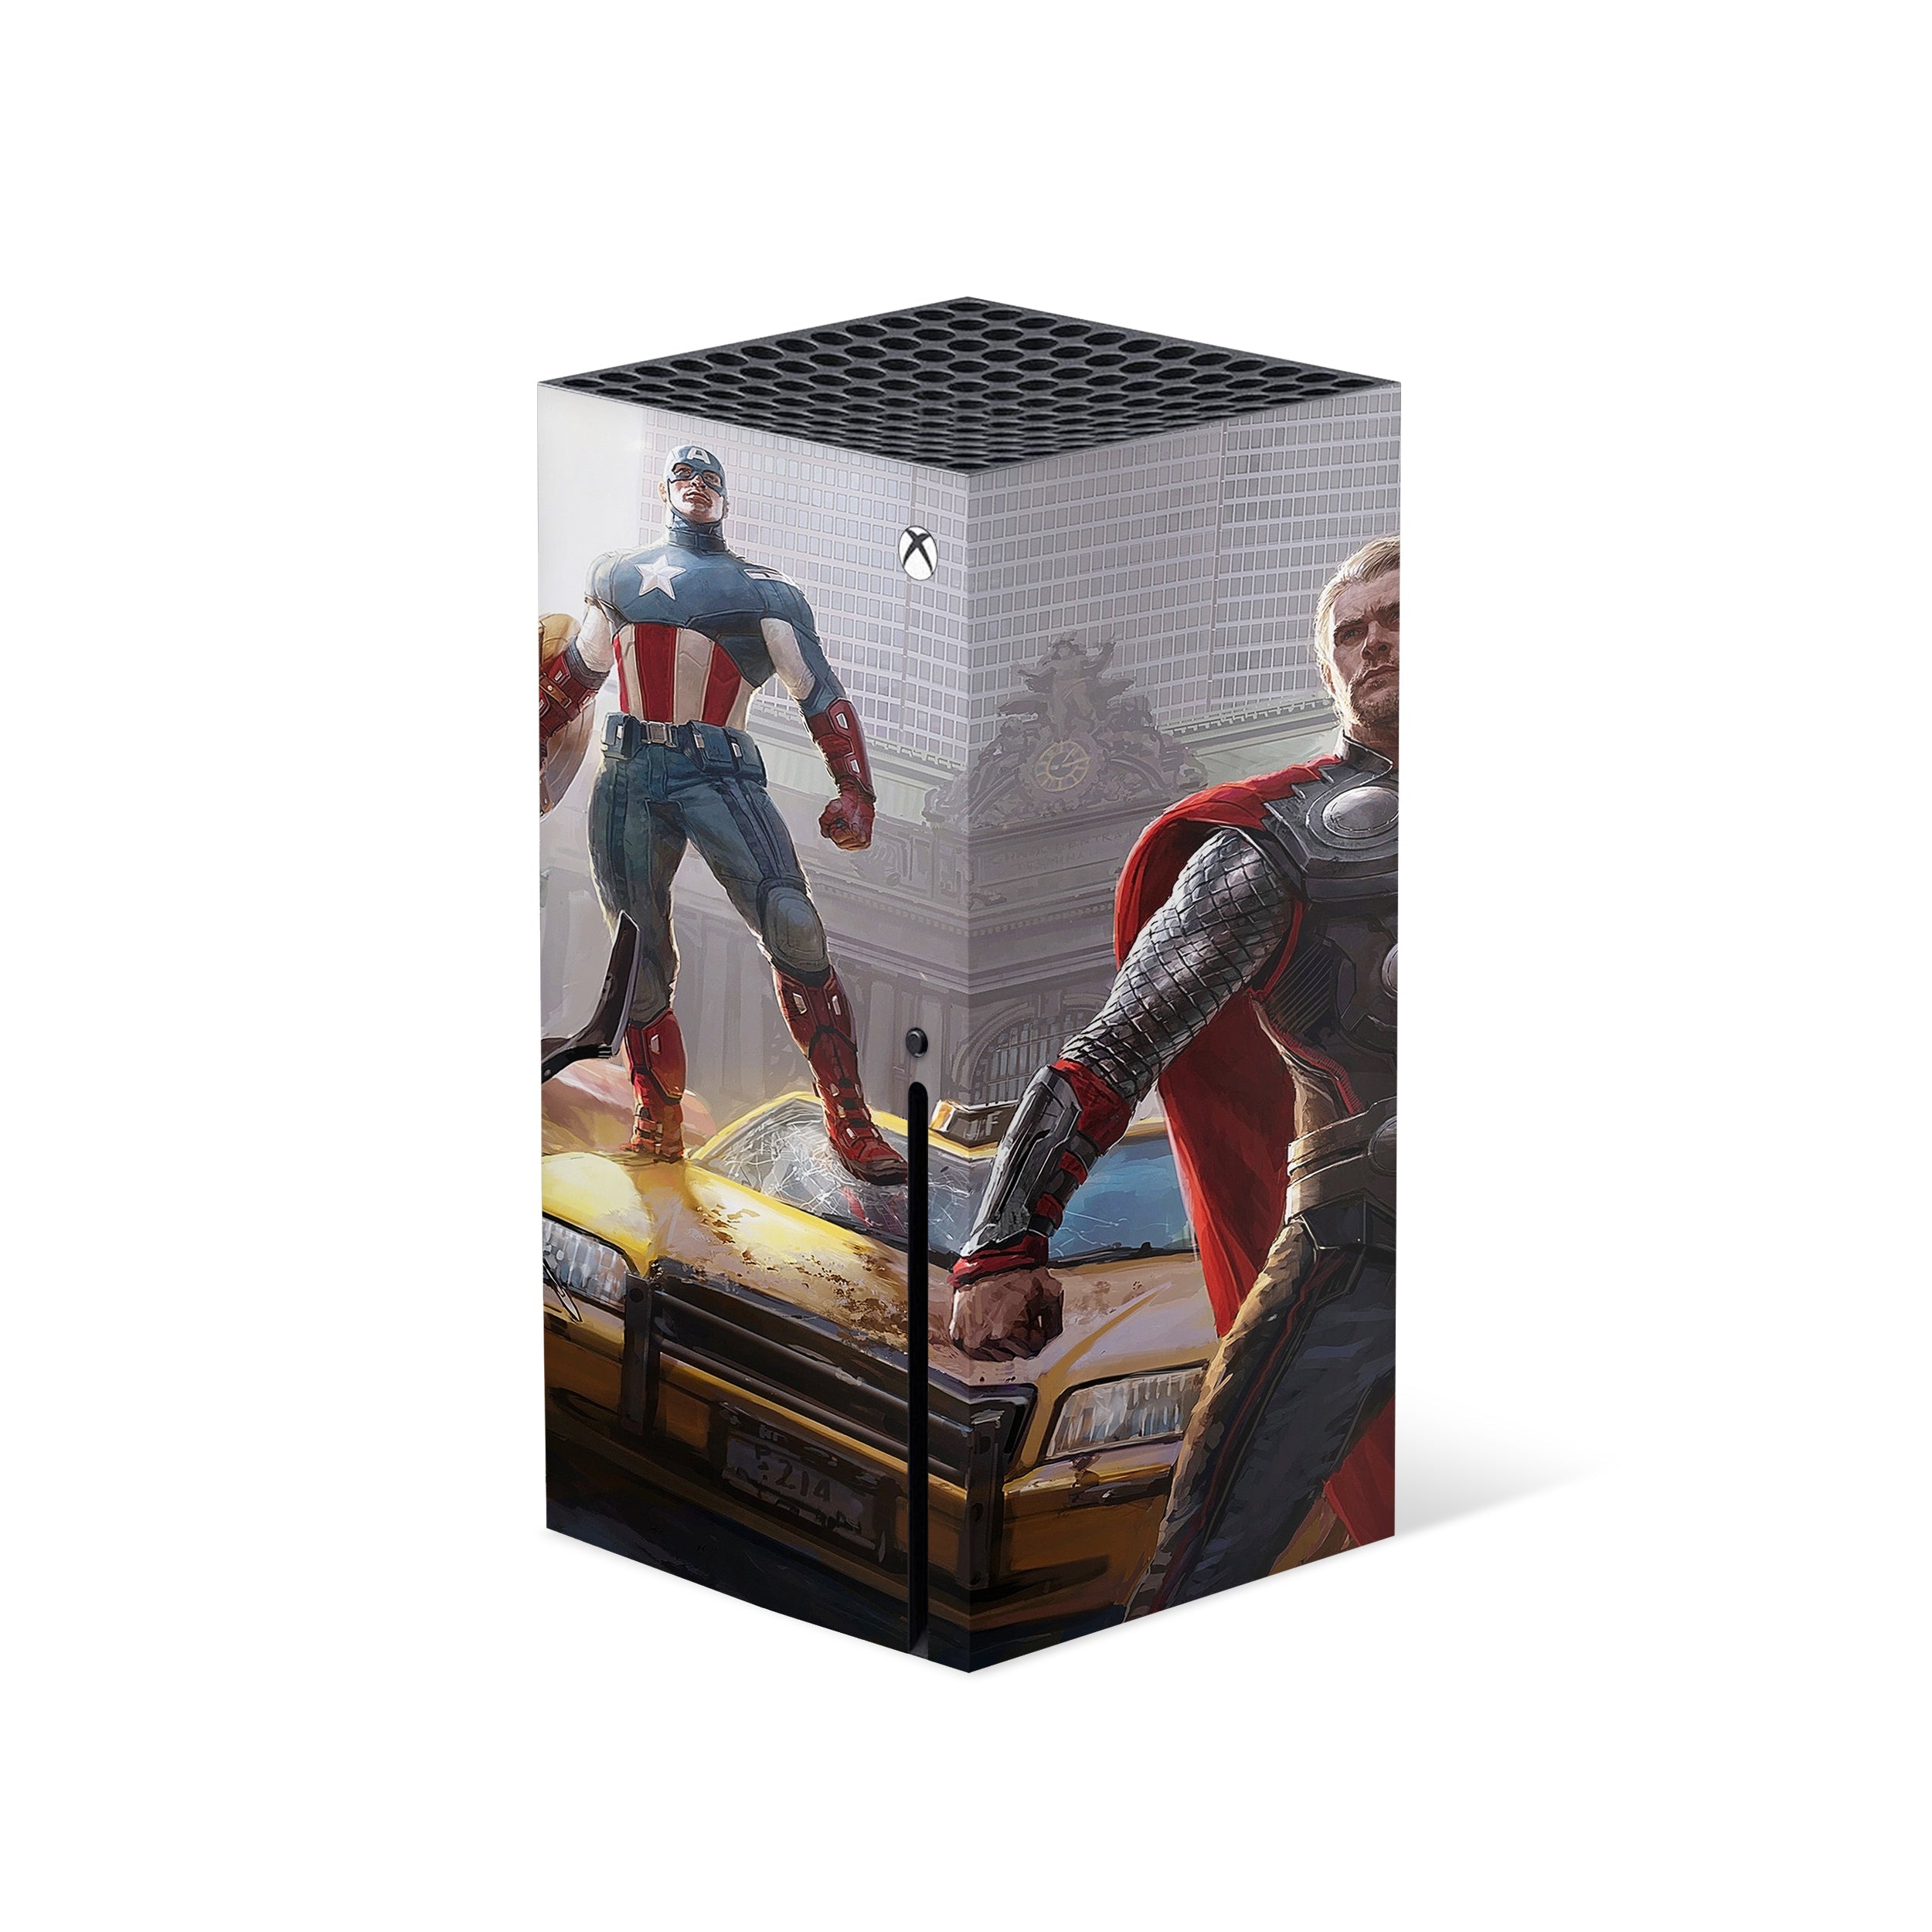 A video game skin featuring a Marvel Avengers design for the Xbox Series X.